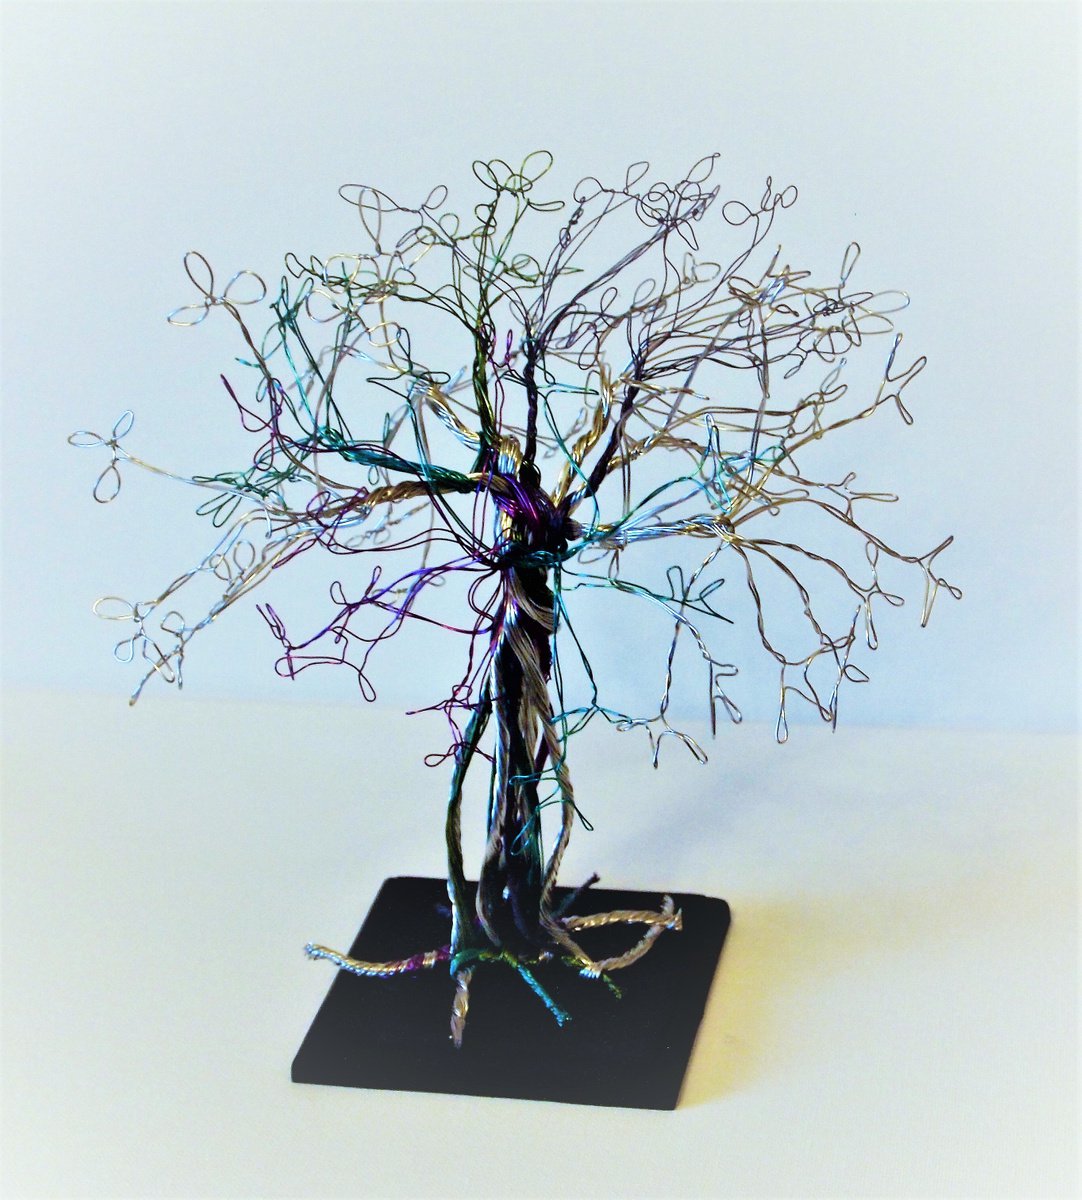 Multi-coloured wire tree sculpture by Steph Morgan